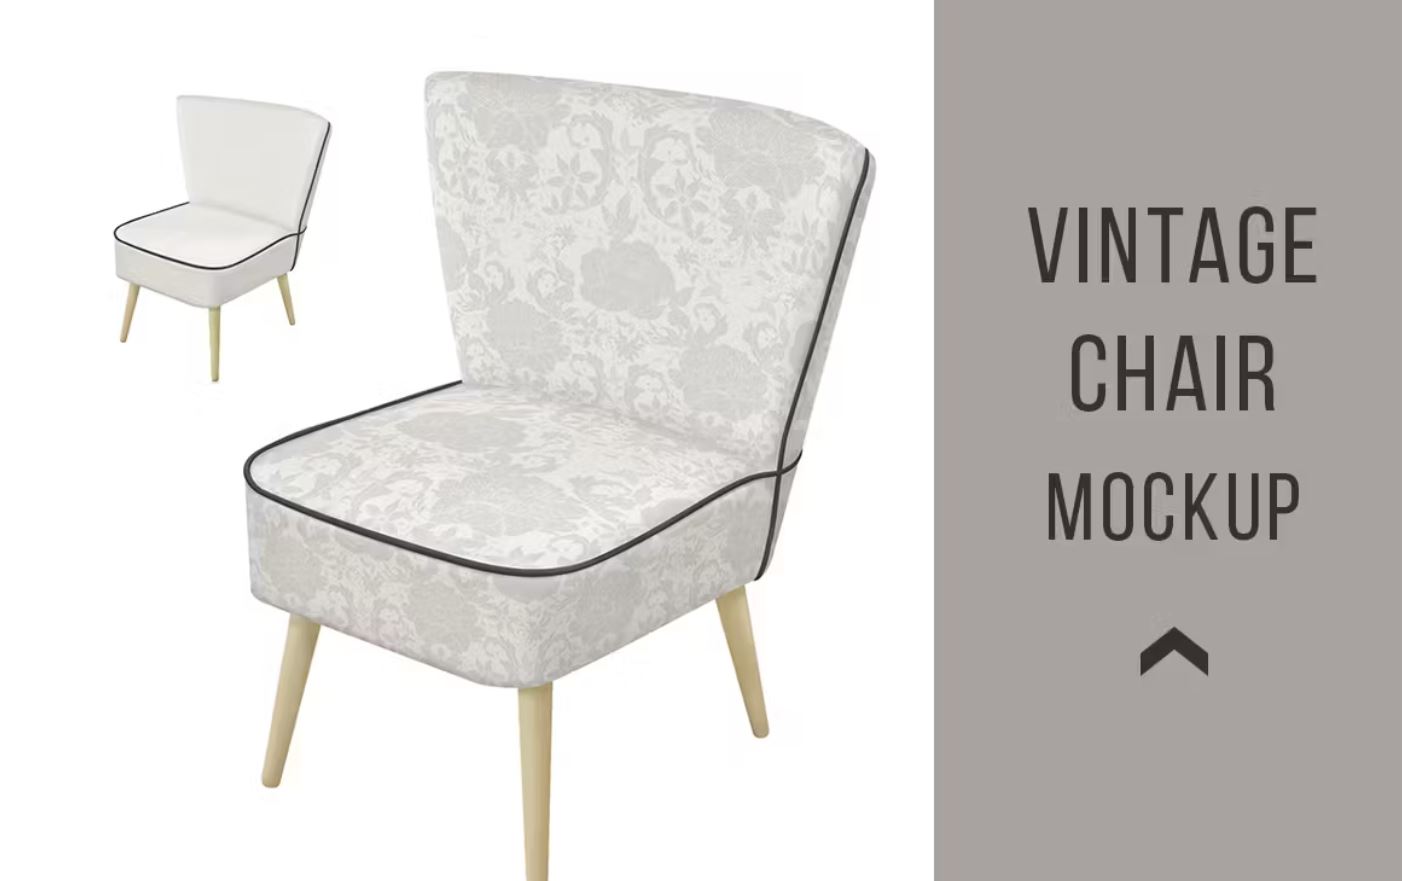 Vintage chair mockup PSD to give a classy look to the apparel designs